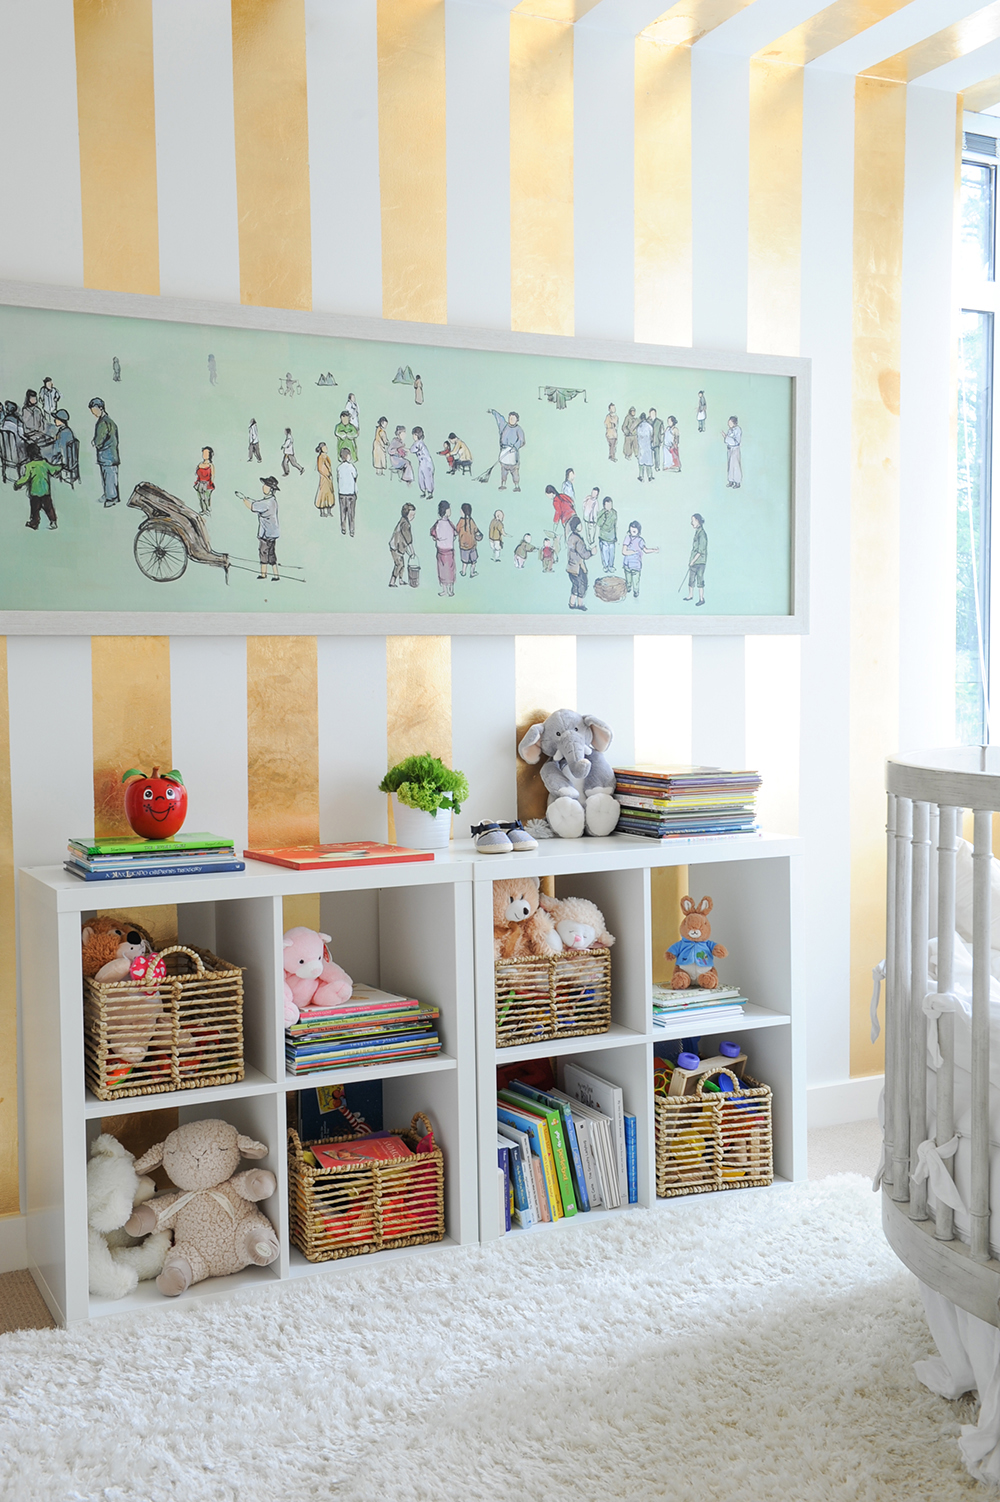 A stylish and glam nursery featuring global-meets-playful design details.